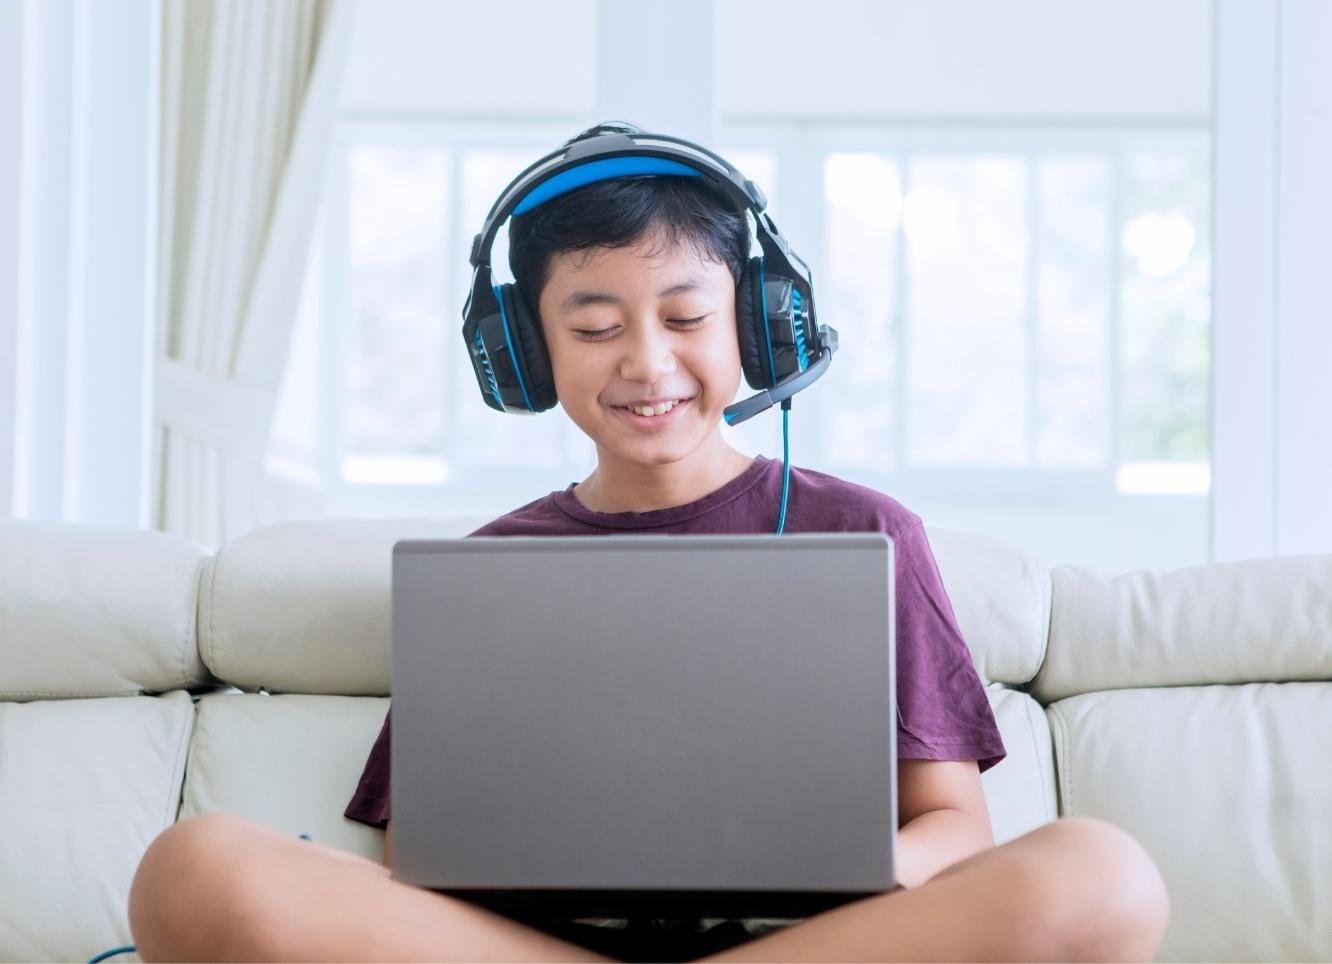 Boy in headsets engaged in online learning